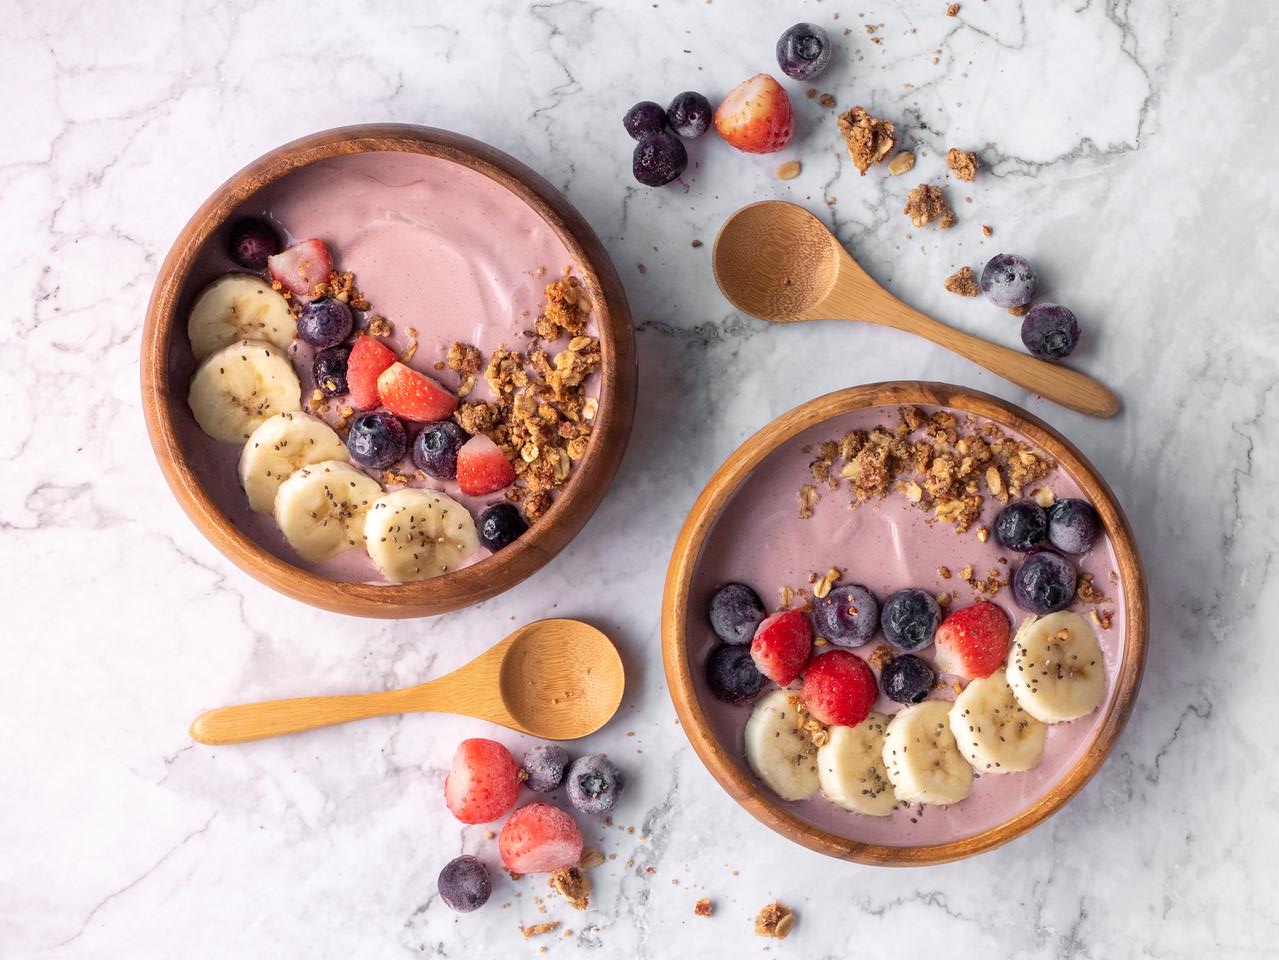 Eat Some 🍰 AI Randomly Generated Desserts to Determine If You’re an Introvert or Extrovert 😃 Acai bowl